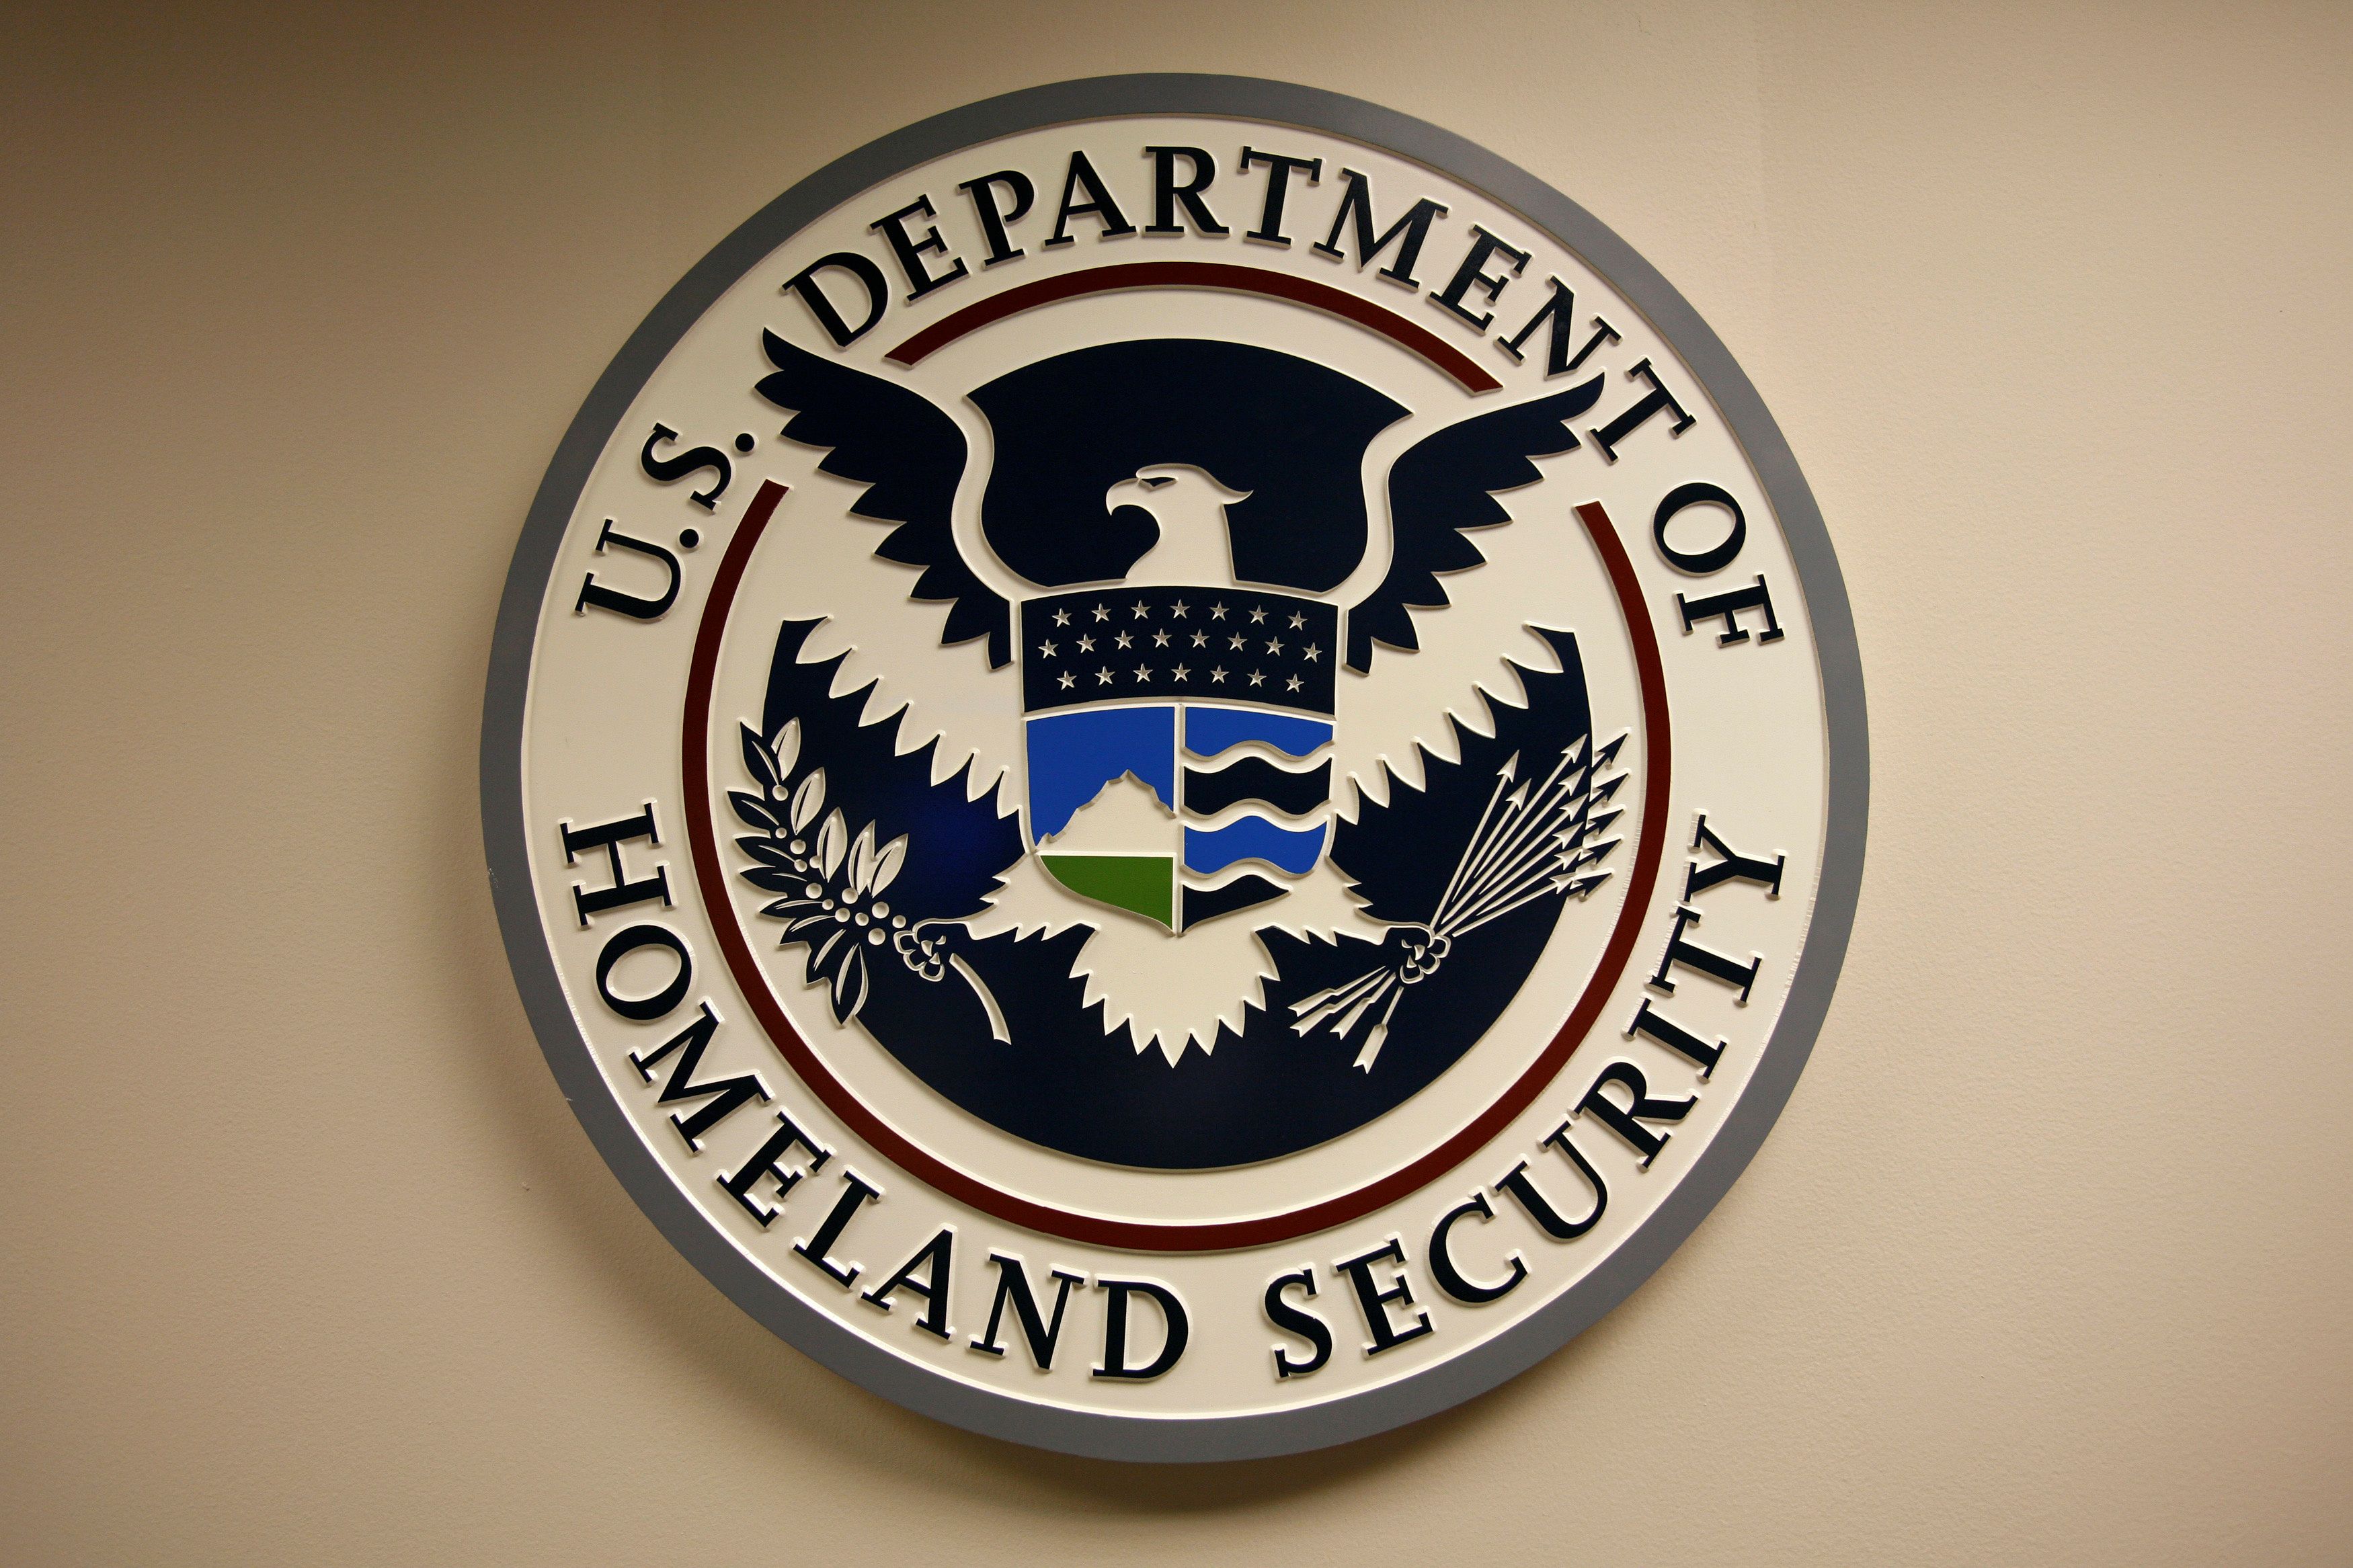 U.S. Department of Homeland Security emblem is pictured at the National Cybersecurity & Communications Integration Center (NCCIC) located just outside Washington in Arlington, Virginia September 24, 2010. REUTERS/Hyungwon Kang/File Photo